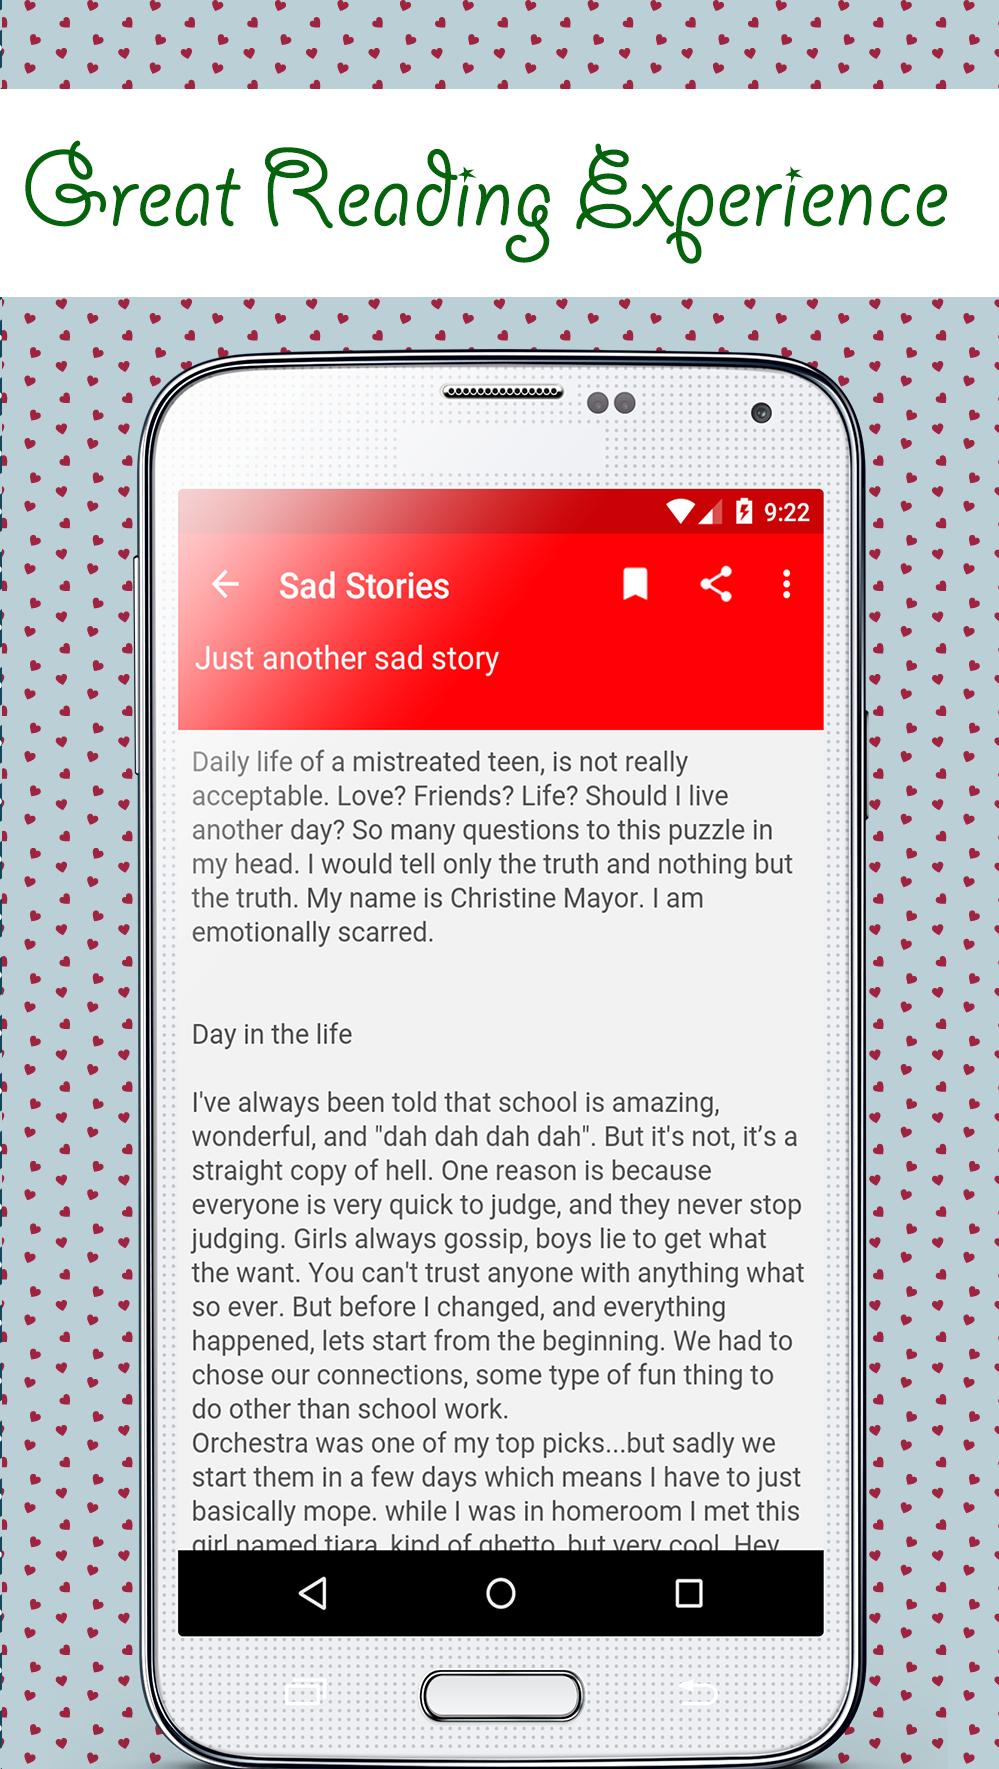 Short Romantic Love Stories for Android - APK Download